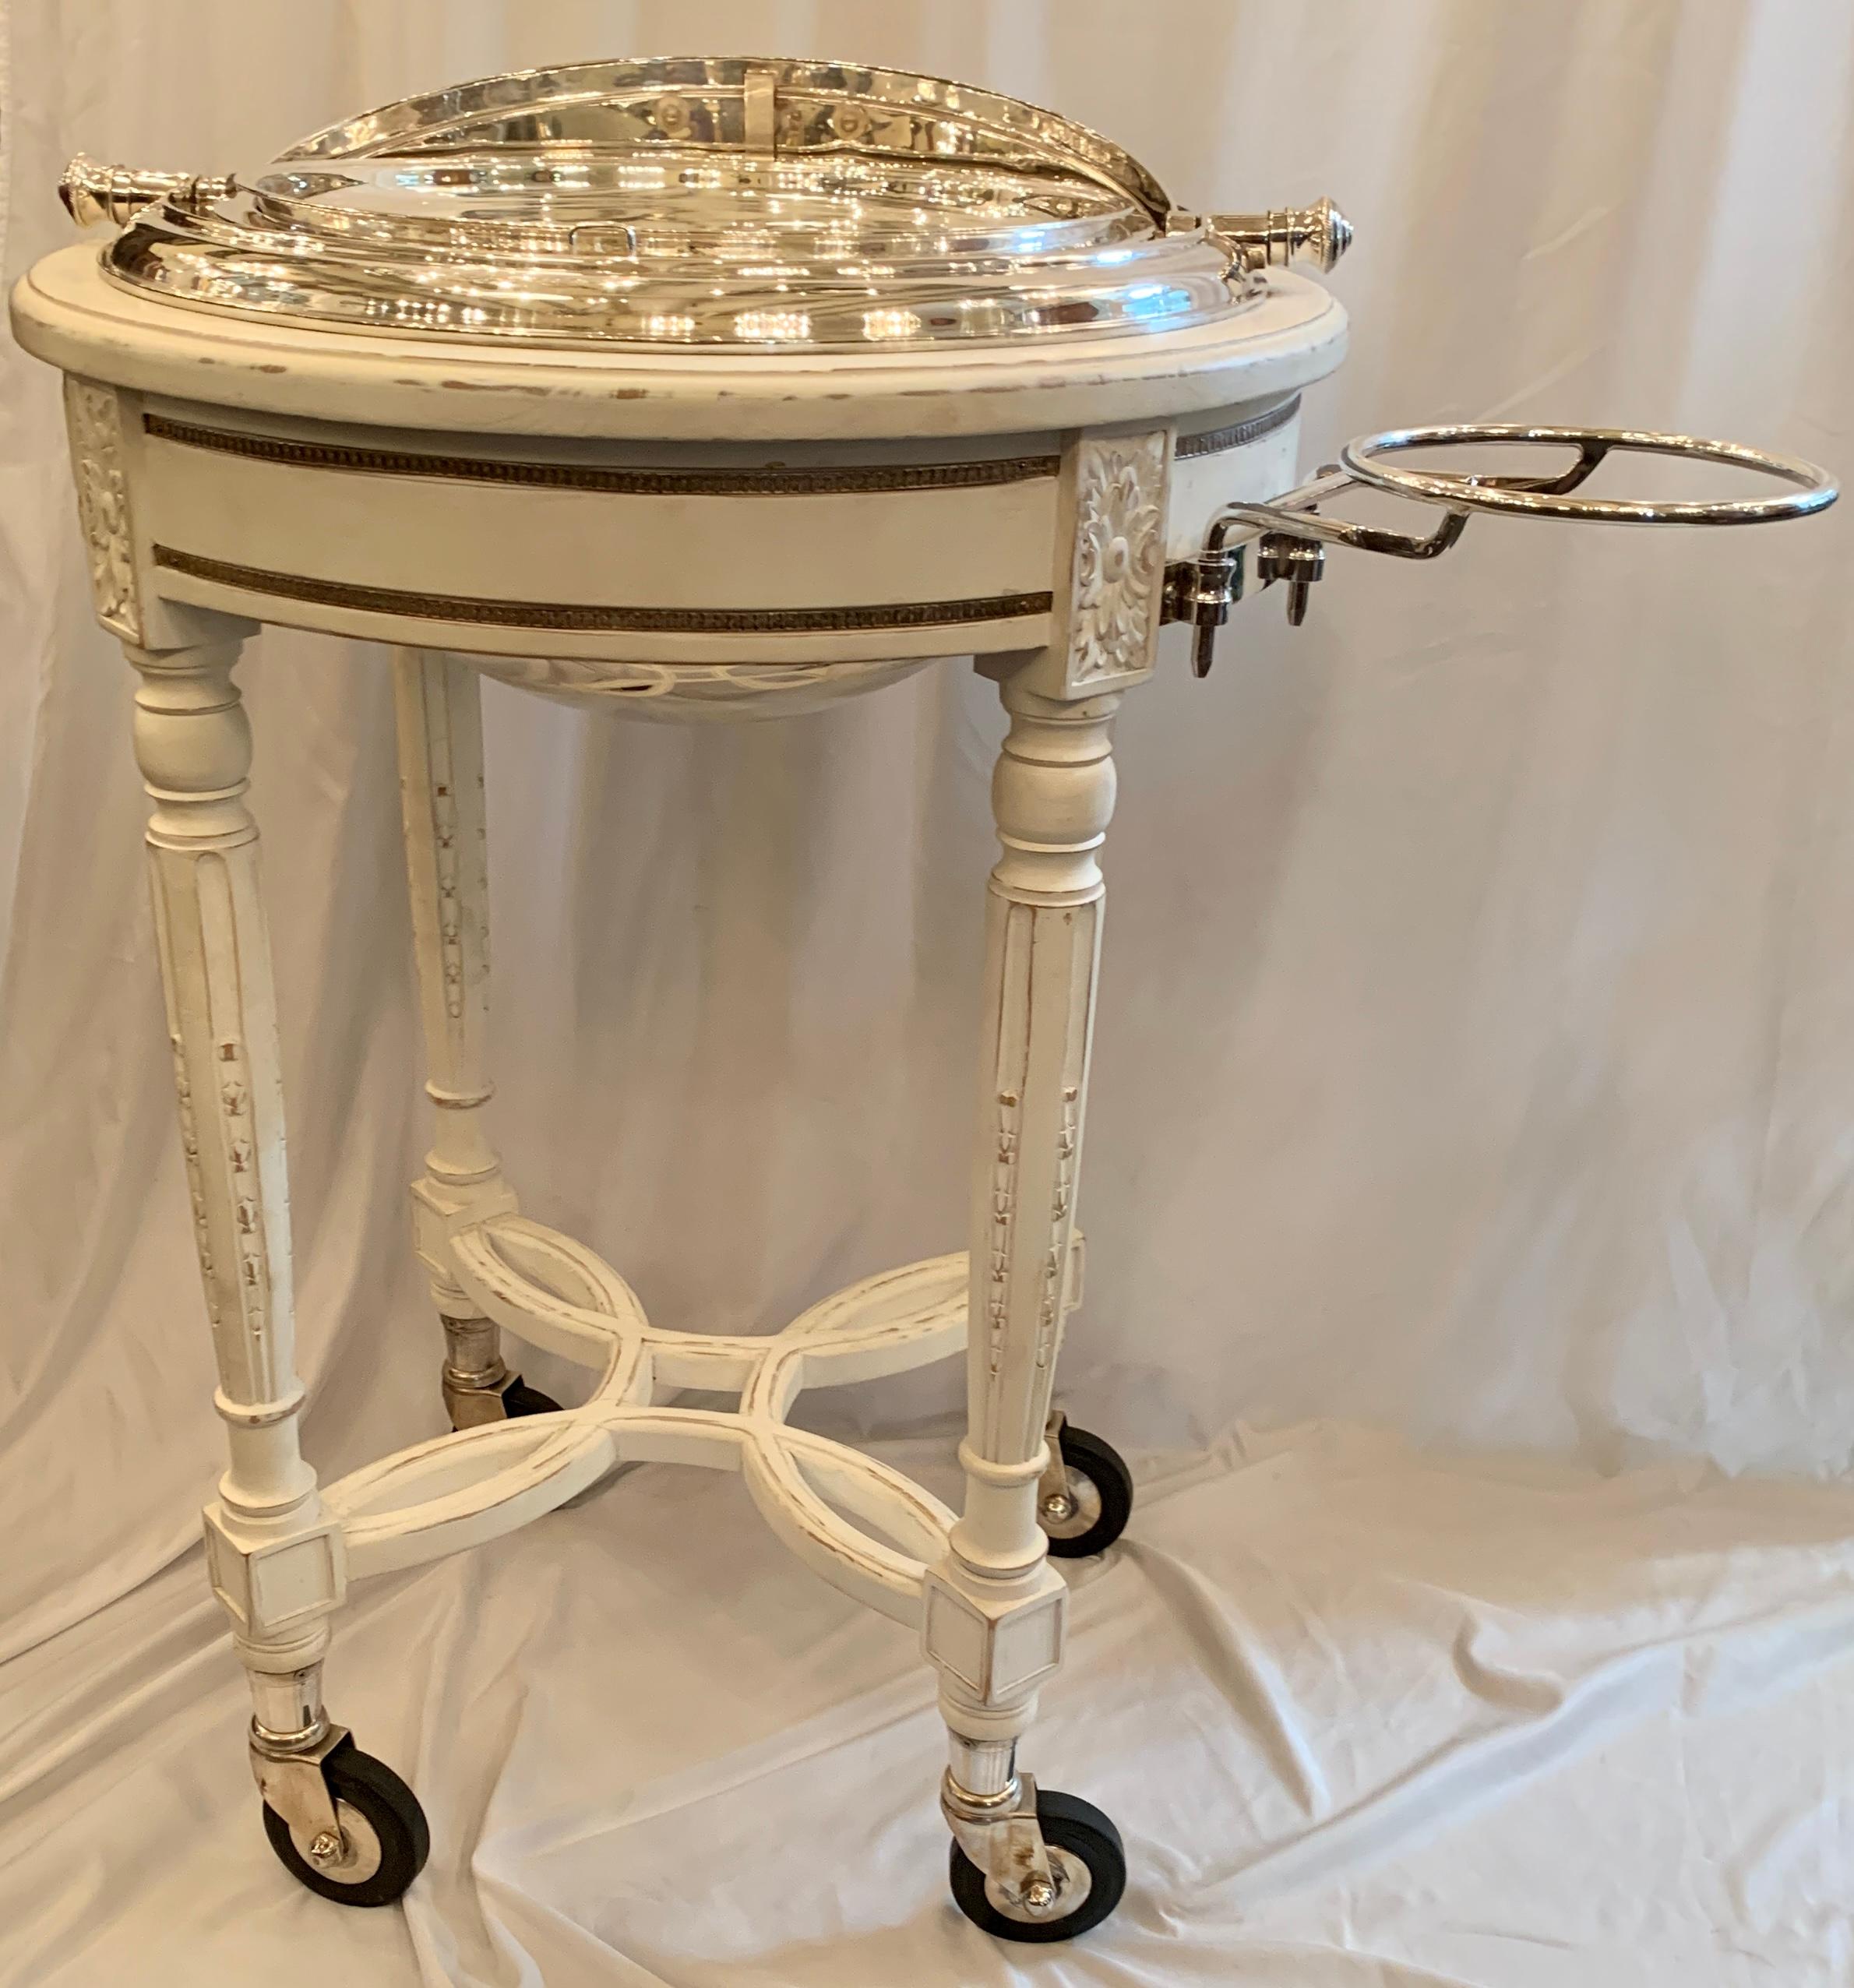 English Estate Handmade Silver-Plated Meat Carving Trolley Cart with Alcohol Burner